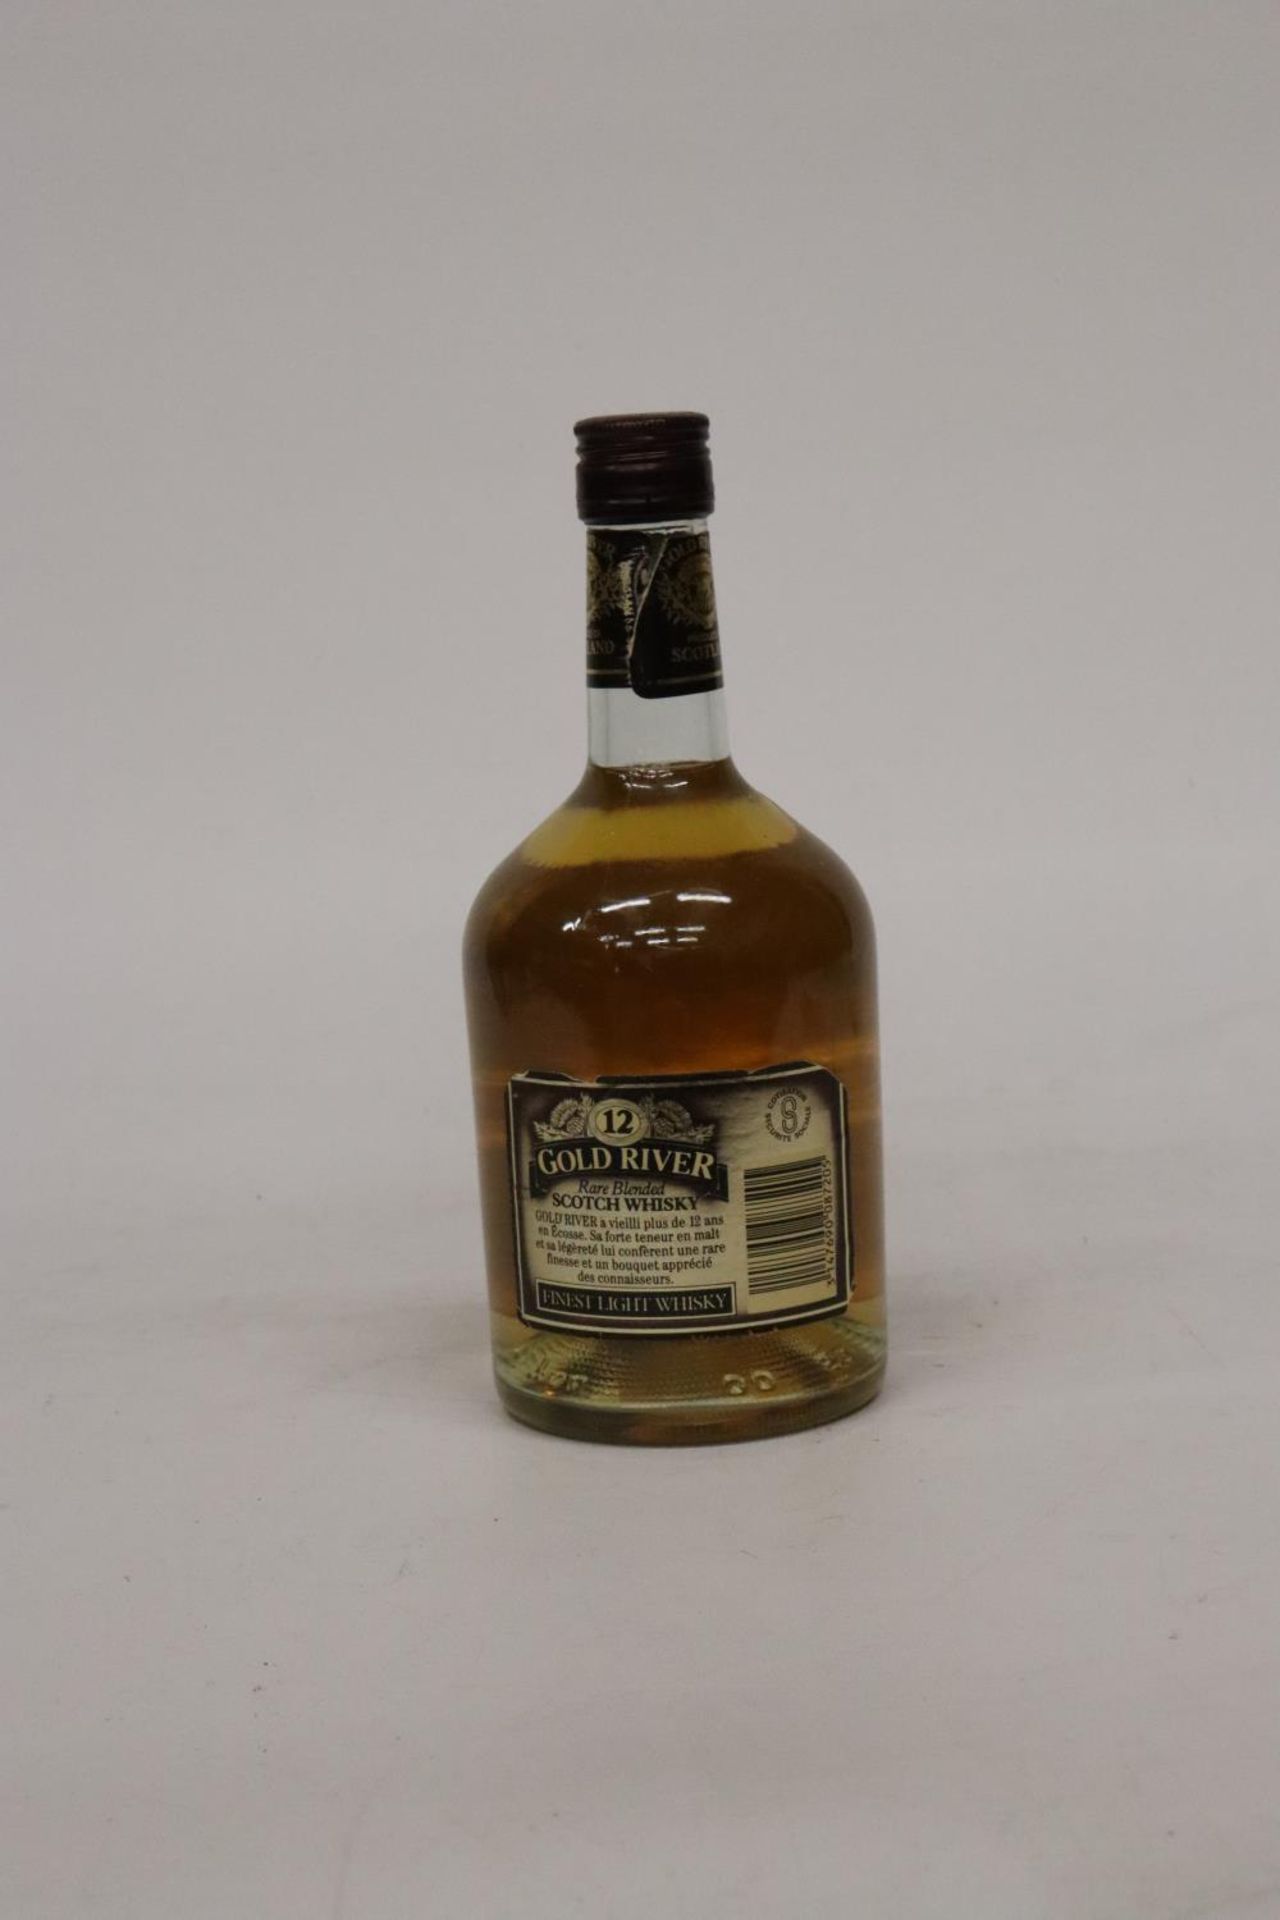 A 70CL BOTTLE OF GOLD RIVER SCOTCH WHISKY - Image 2 of 3